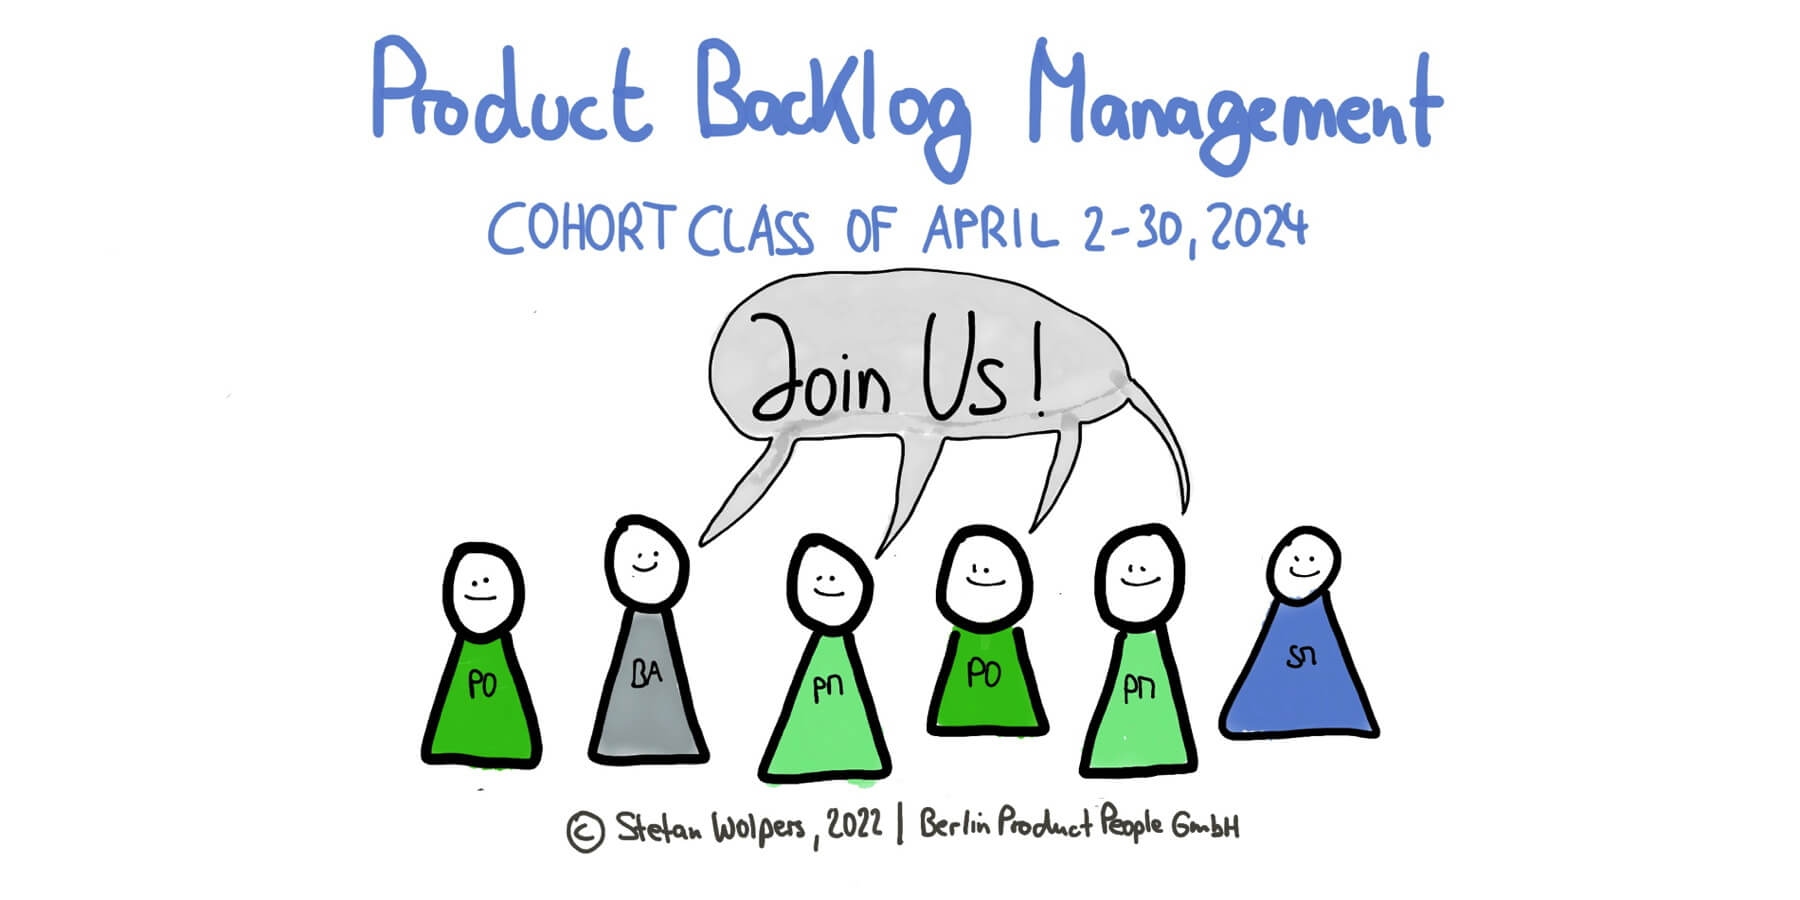 Product Backlog Management Cohort of April 2-30, 2024, with PST and Author Stefan Wolpers — Berlin-Product-People.com